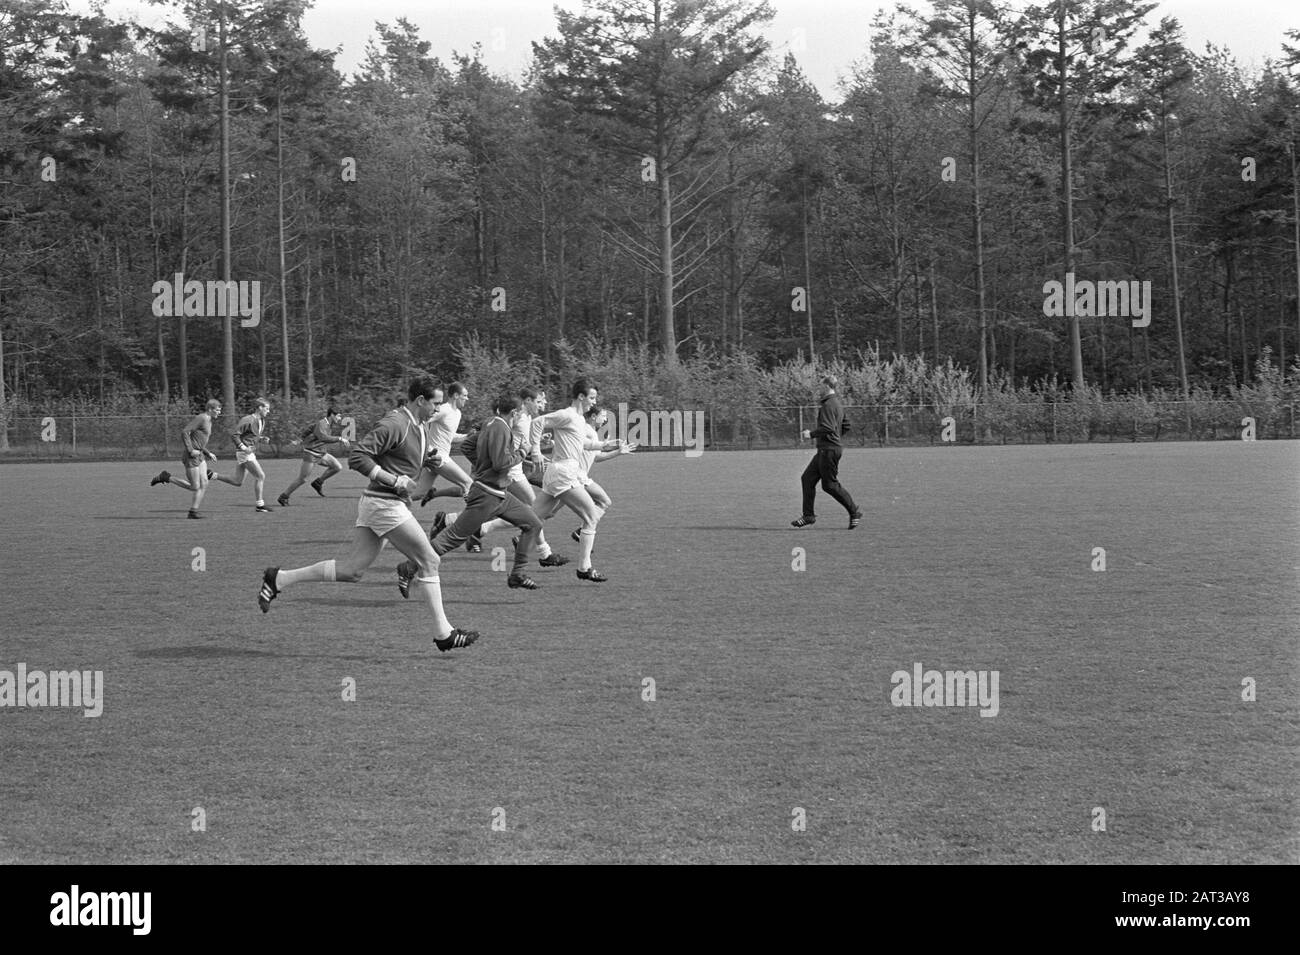 The Dutch national team against Scotland, players during training Date: May 9, 1966 Location: Great Britain, Scotland Keywords: sport, football Stock Photo